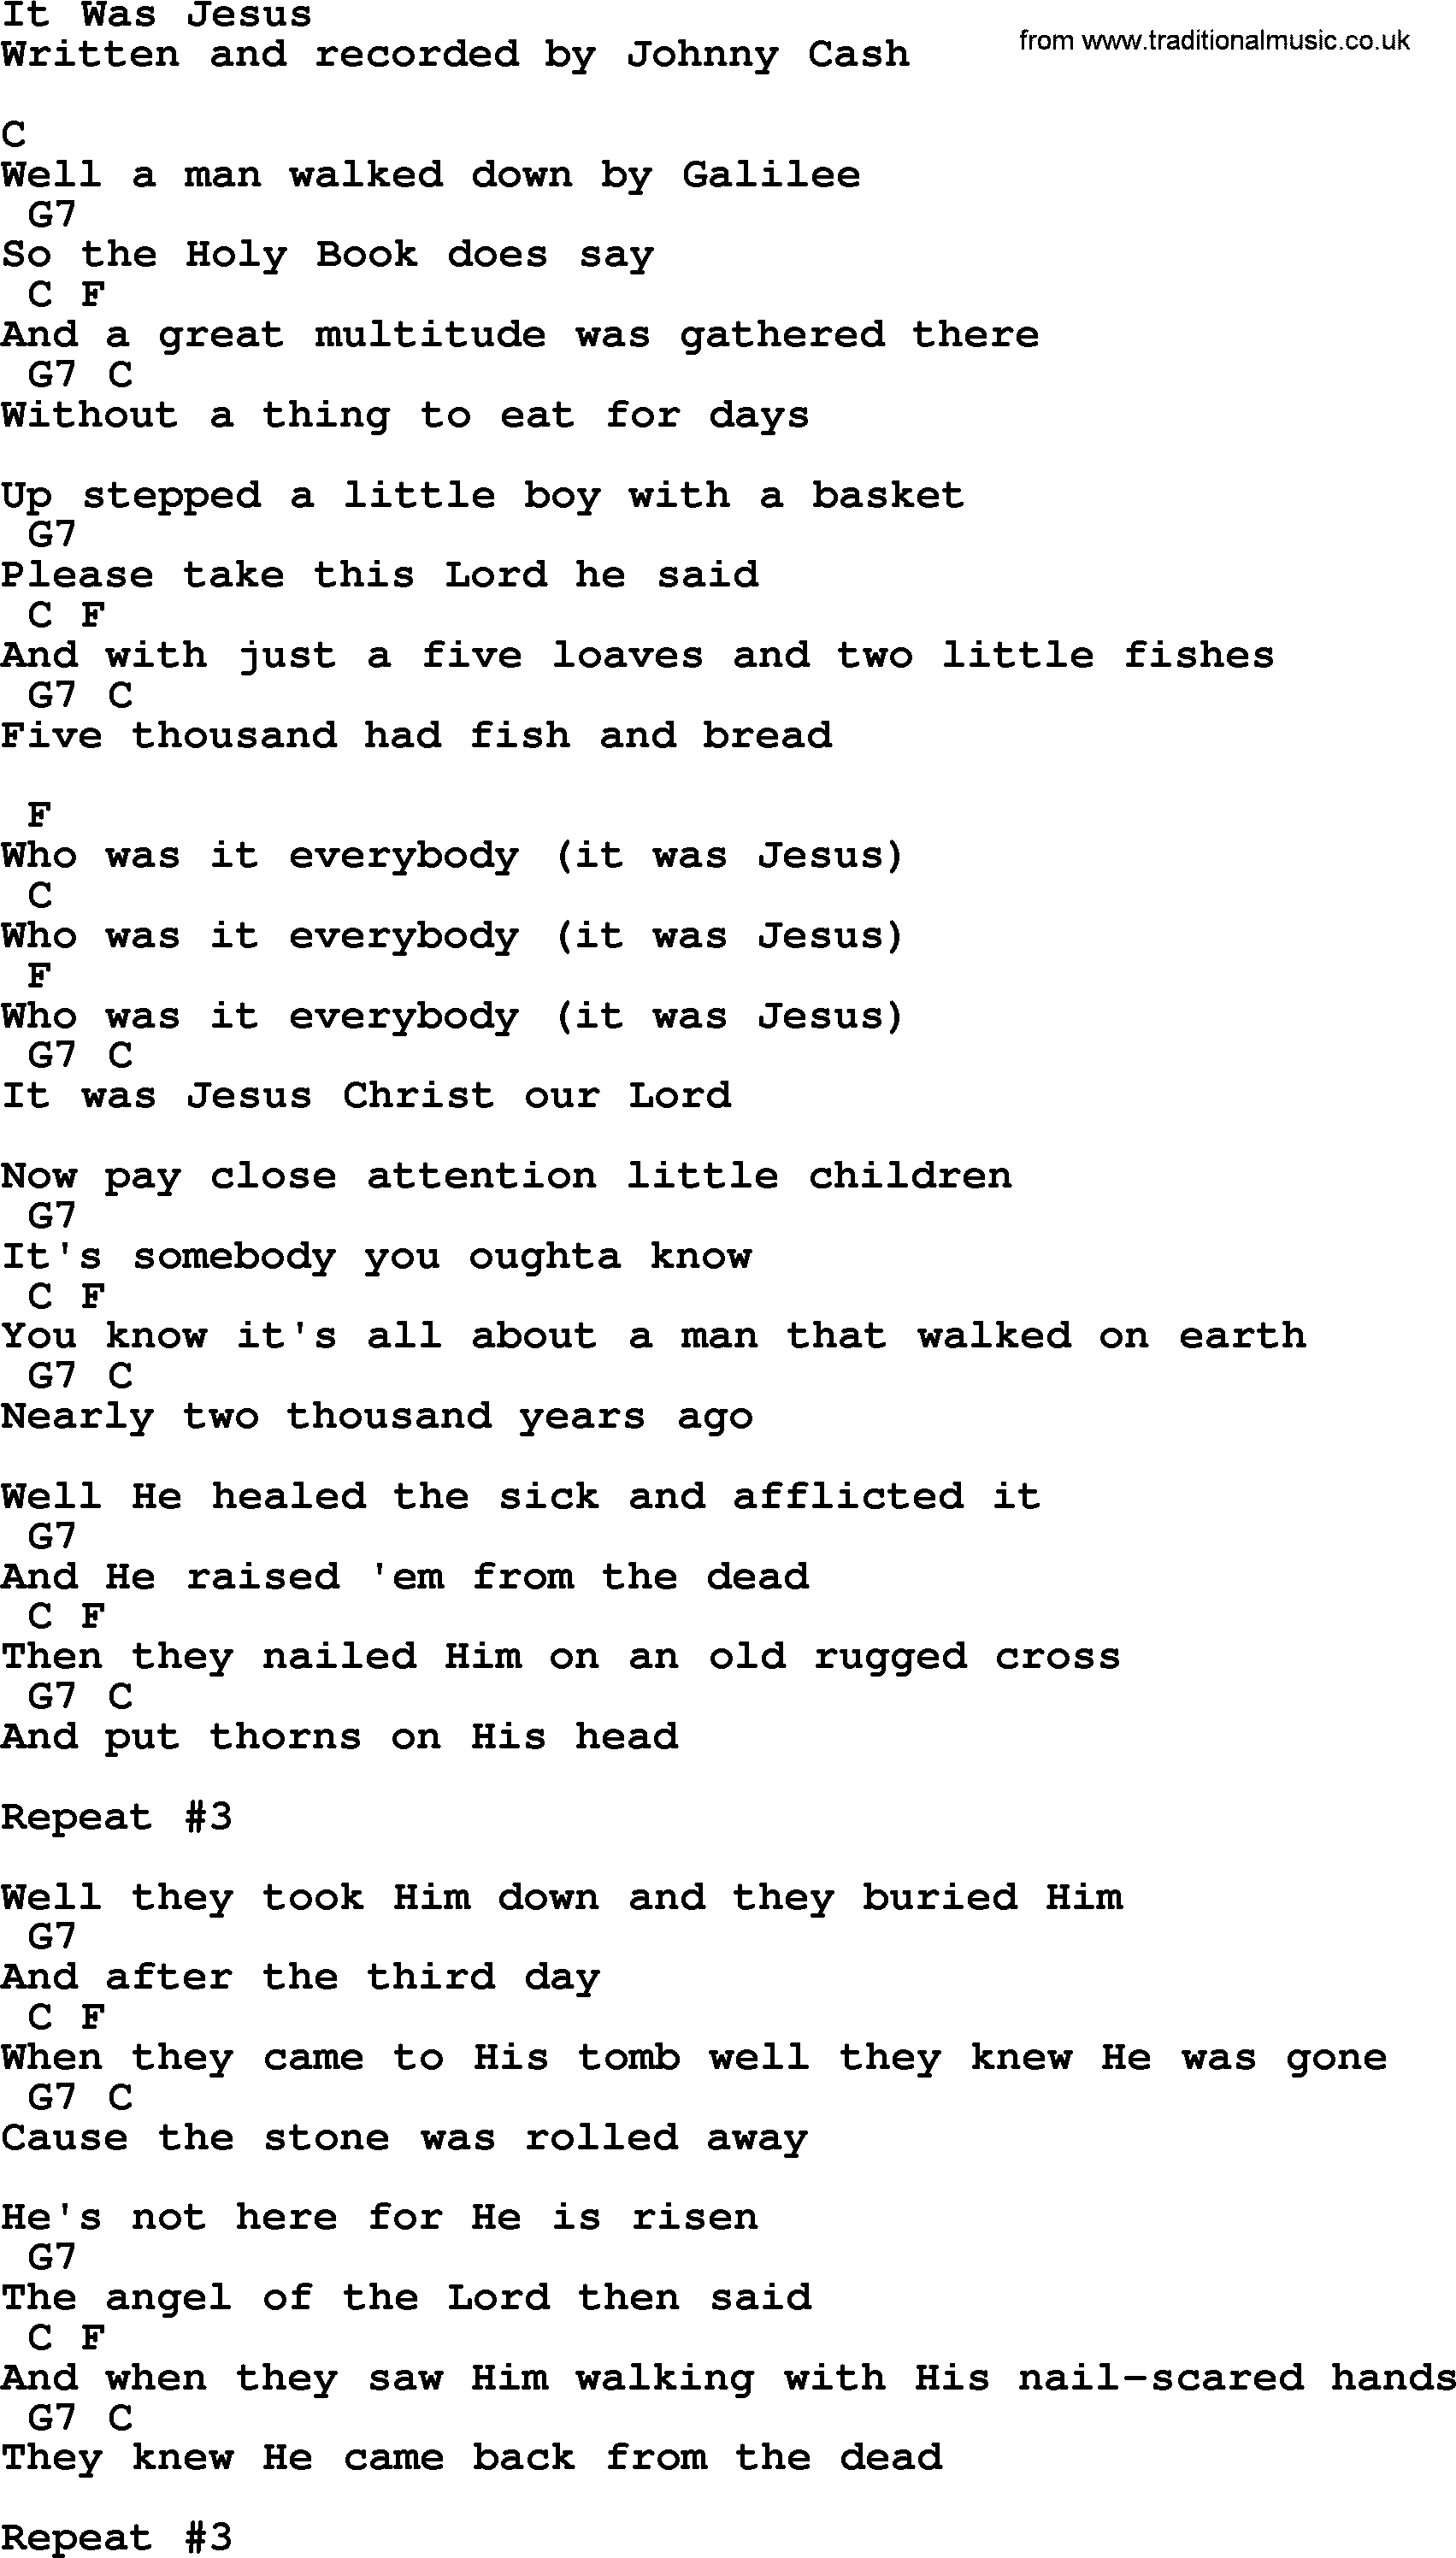 Johnny Cash song It Was Jesus, lyrics and chords